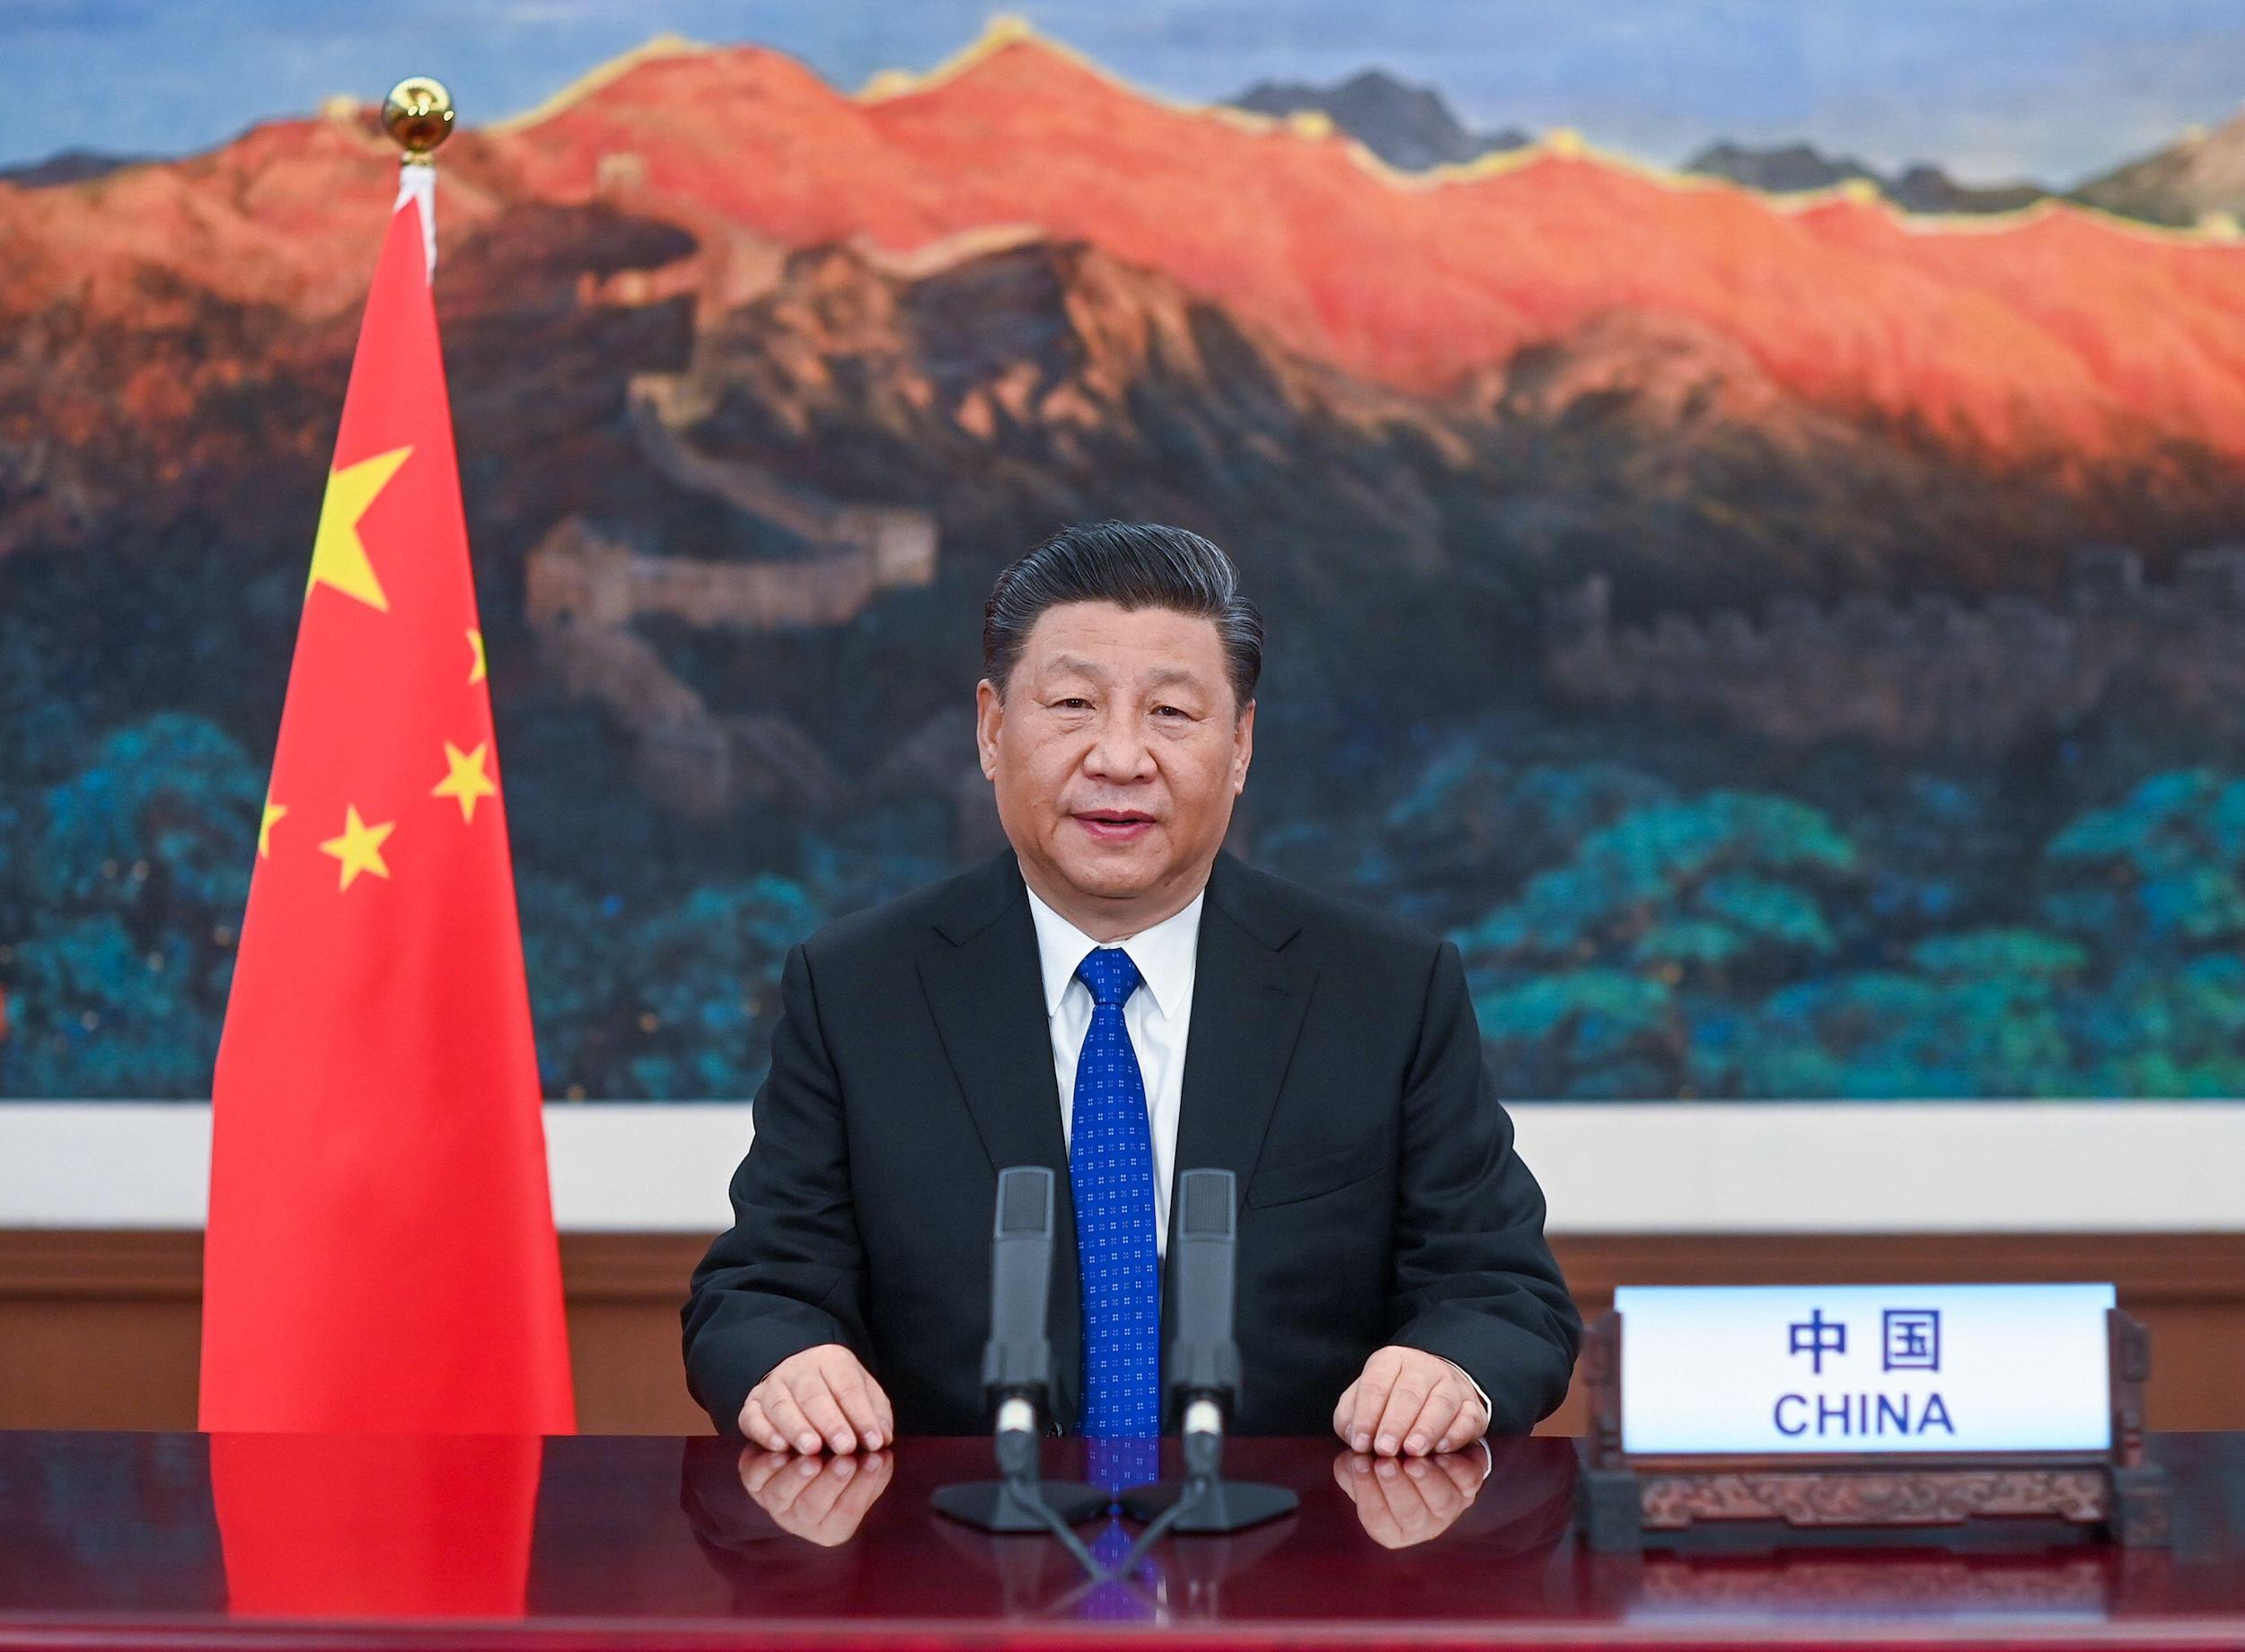 <p>Chinese President Xi Jinping delivers a speech at the opening of the 73rd World Health Assembly on May 18, 2020 [image by: Li Xueren/Xinhua/Alamy Live News</p>